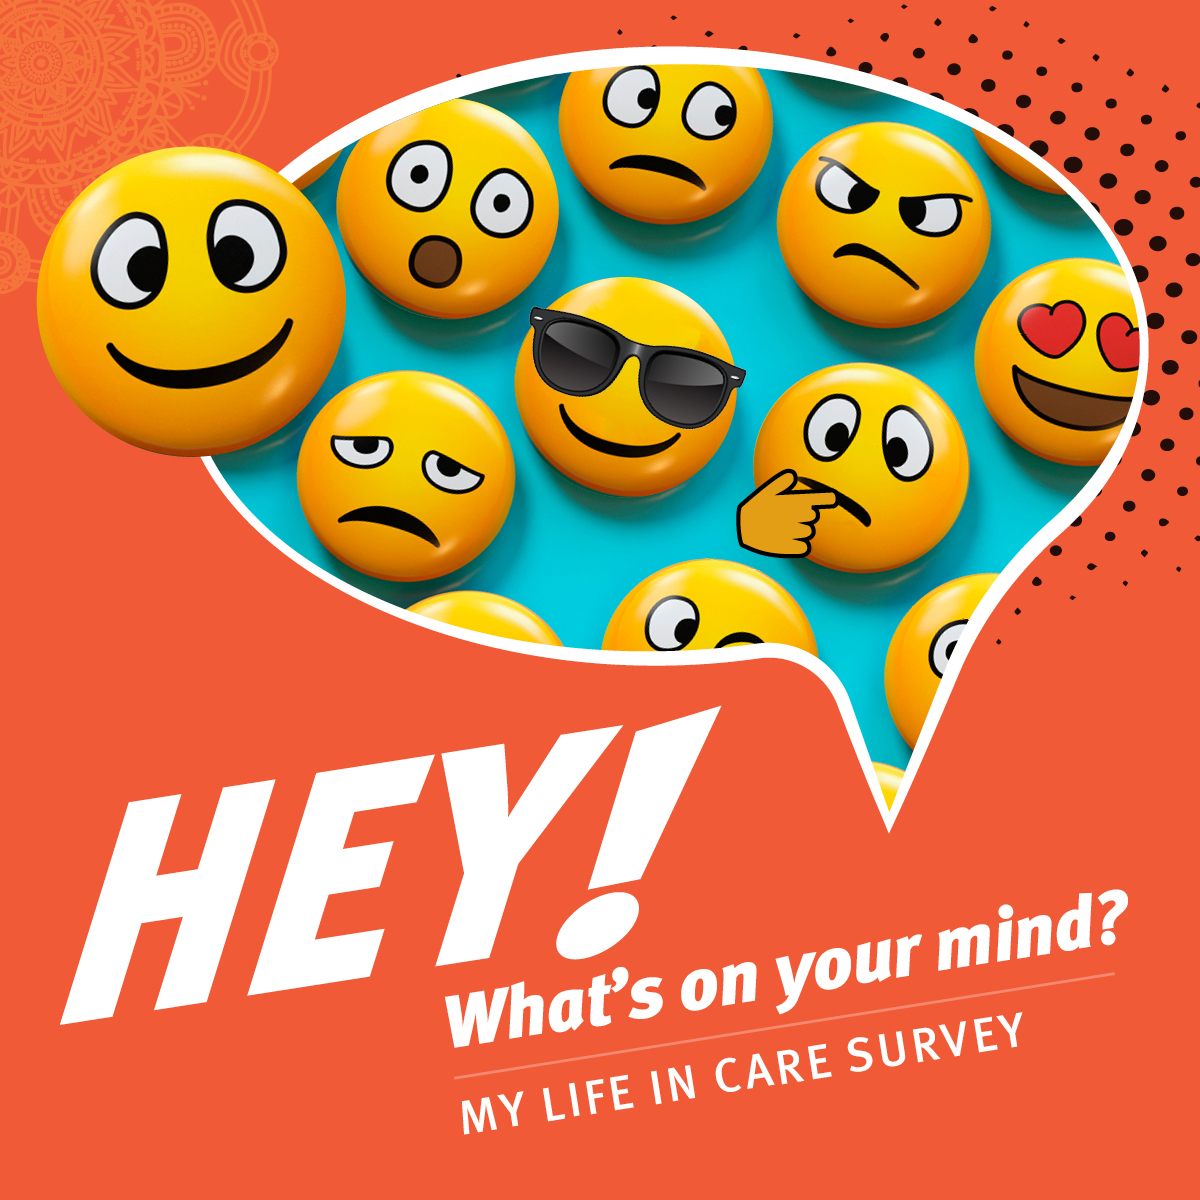 My life in care survey Shareable Social media 1200x1200